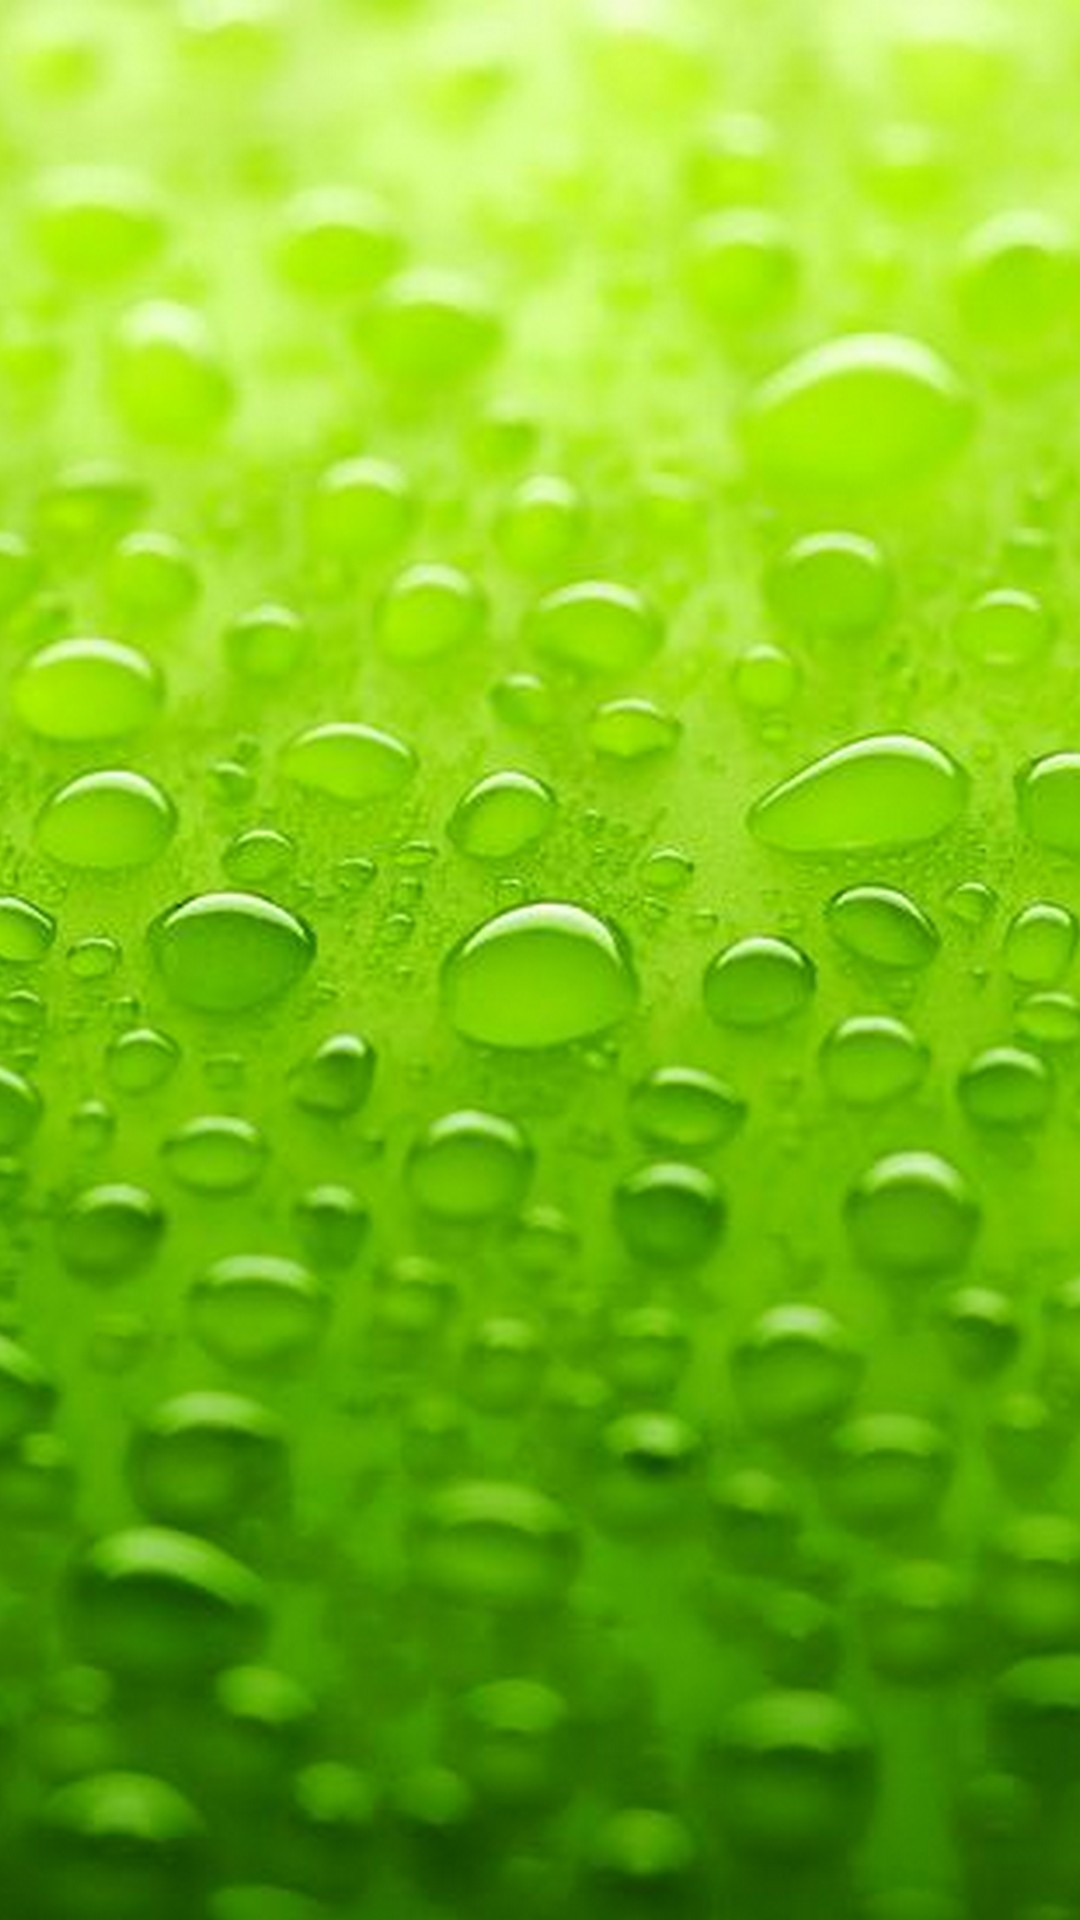 Green iPhone 12 Wallpaper HD with high-resolution 1080x1920 pixel. Download all Mobile Wallpapers and Use them as wallpapers for your iPhone, Tablet, iPad, Android and other mobile devices